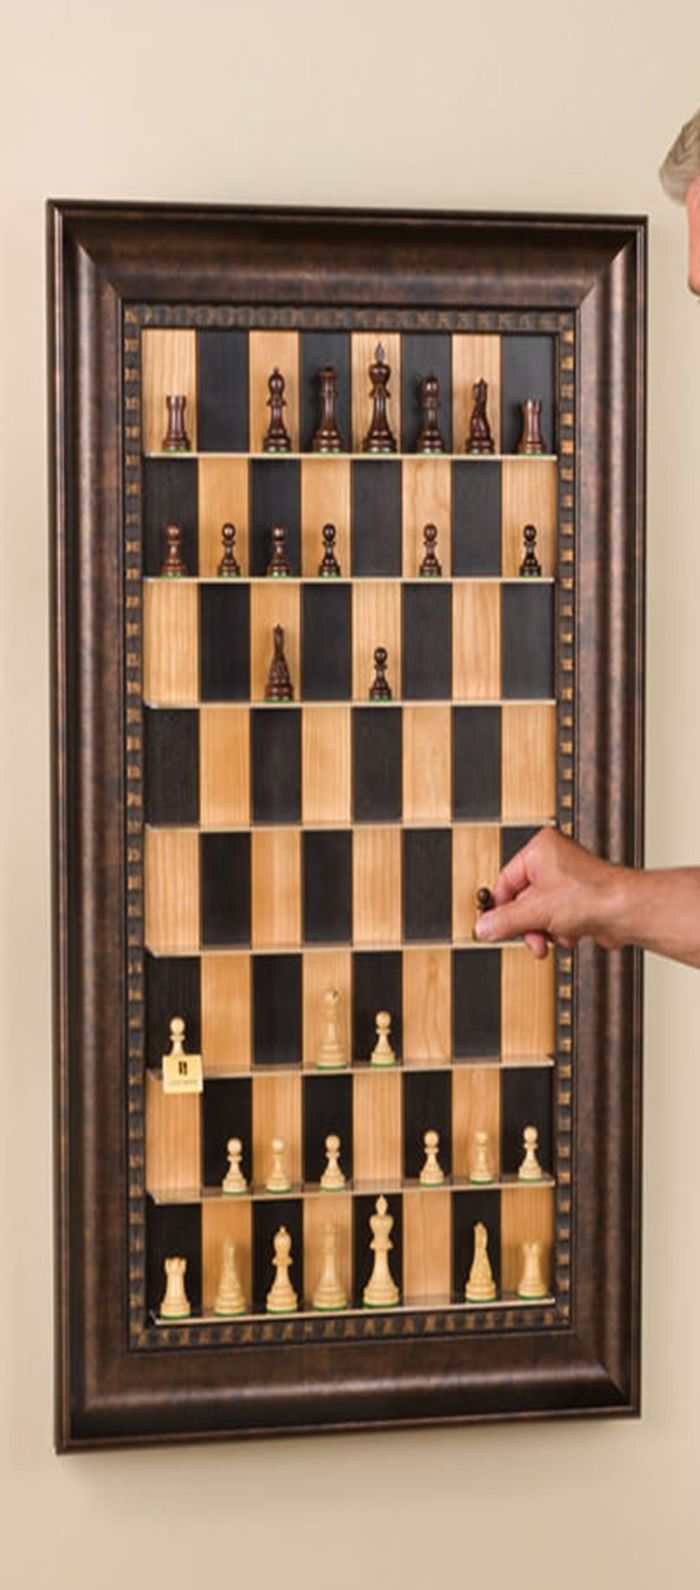 hanging chess board